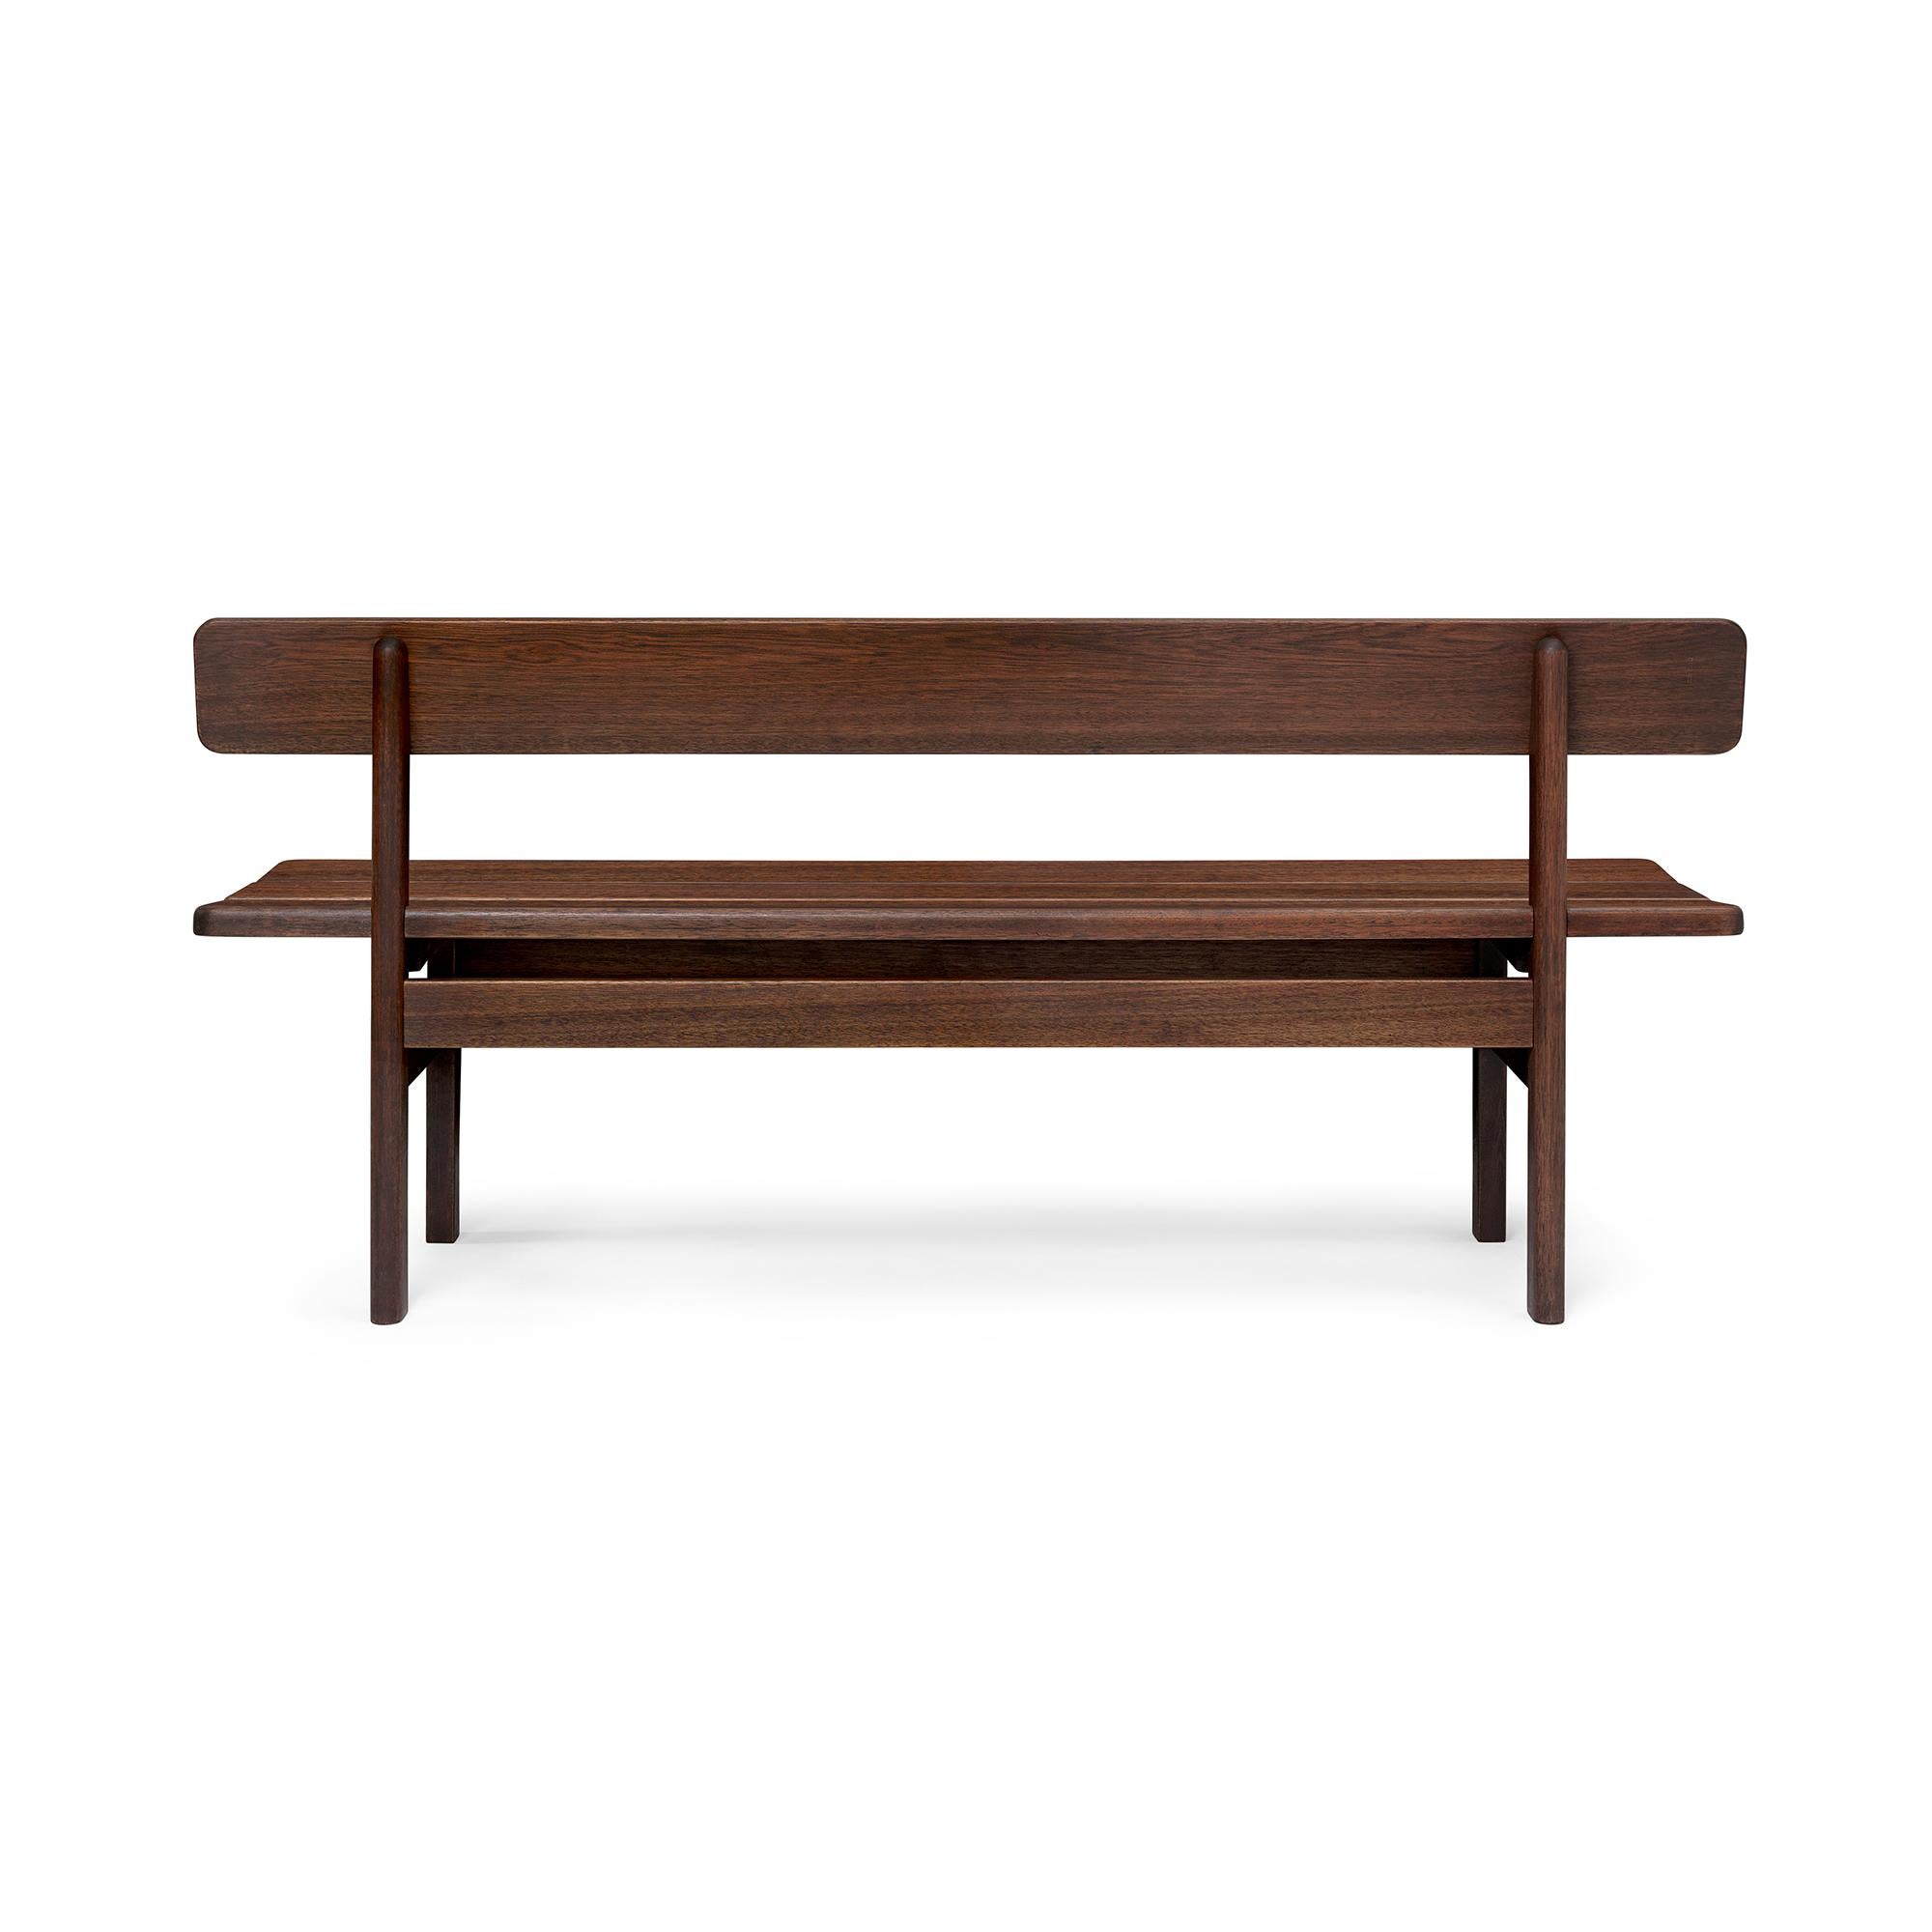 Børge Mogensen 'BM0699 Asserbo' Bench in Oiled Eucalyptus for Carl Hansen & Son.

The story of Danish Modern begins in 1908 when Carl Hansen opened his first workshop. His firm commitment to beauty, comfort, refinement, and craftsmanship is